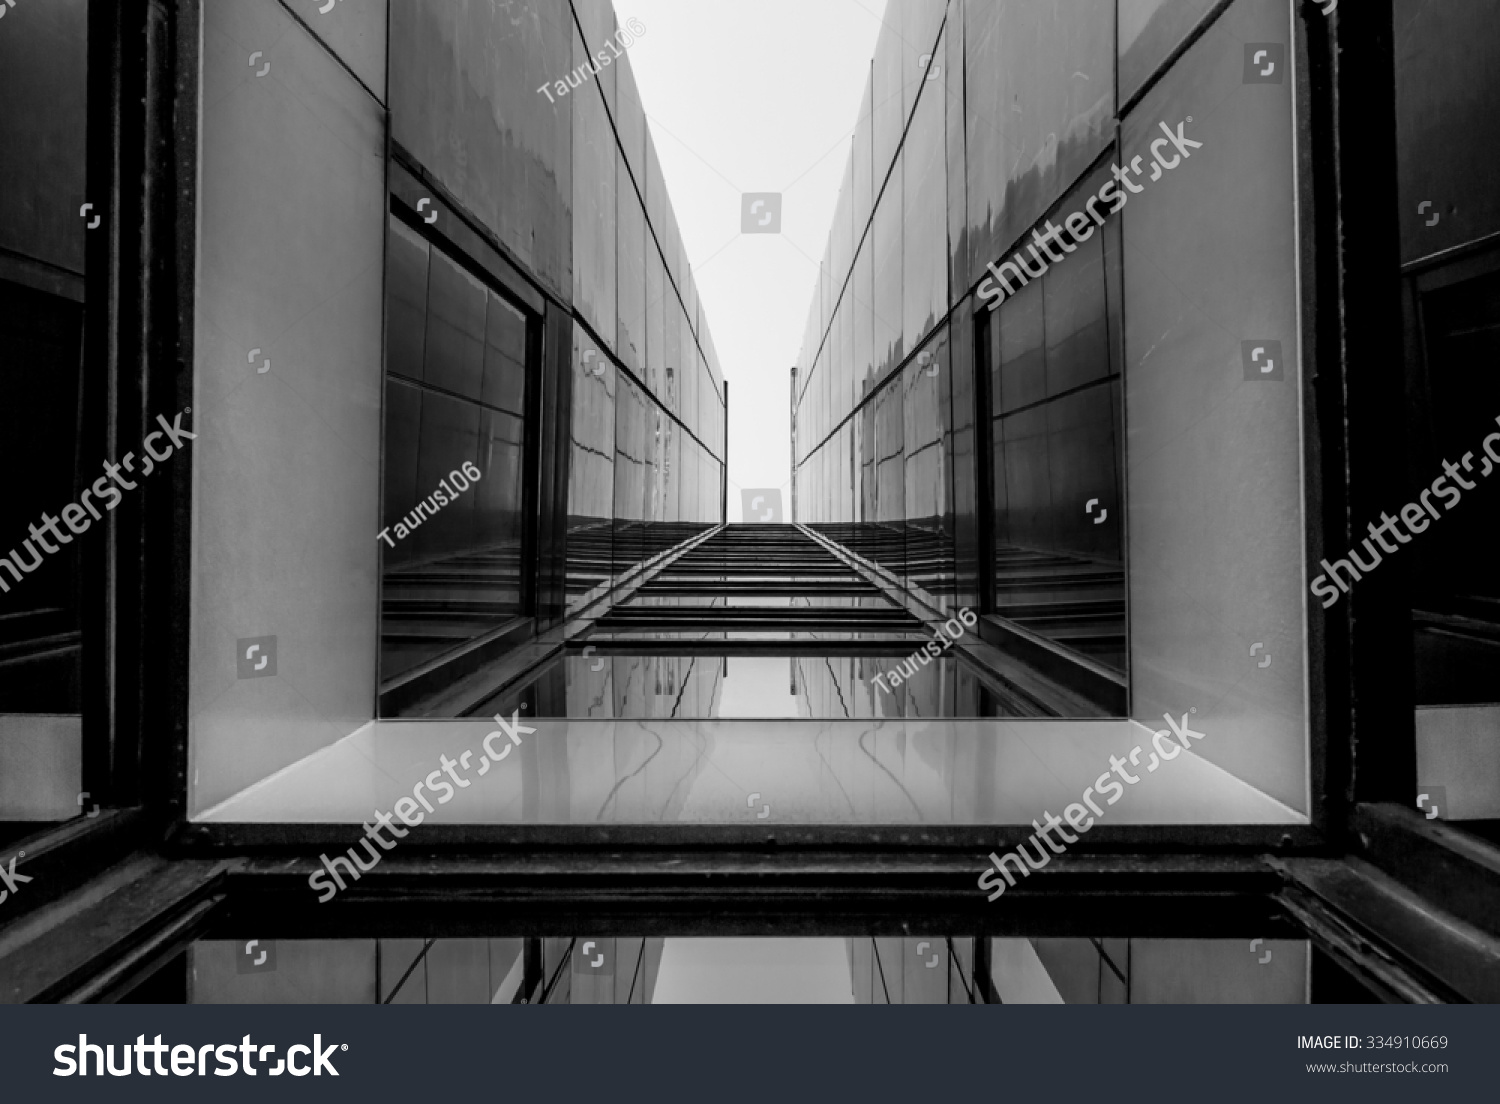 Urban Geometry, looking up to glass building. Modern architecture, glass and steel. Abstract architectural design. Inspirational, artistic image. Industrial design. .Modern building. Black and white. #334910669